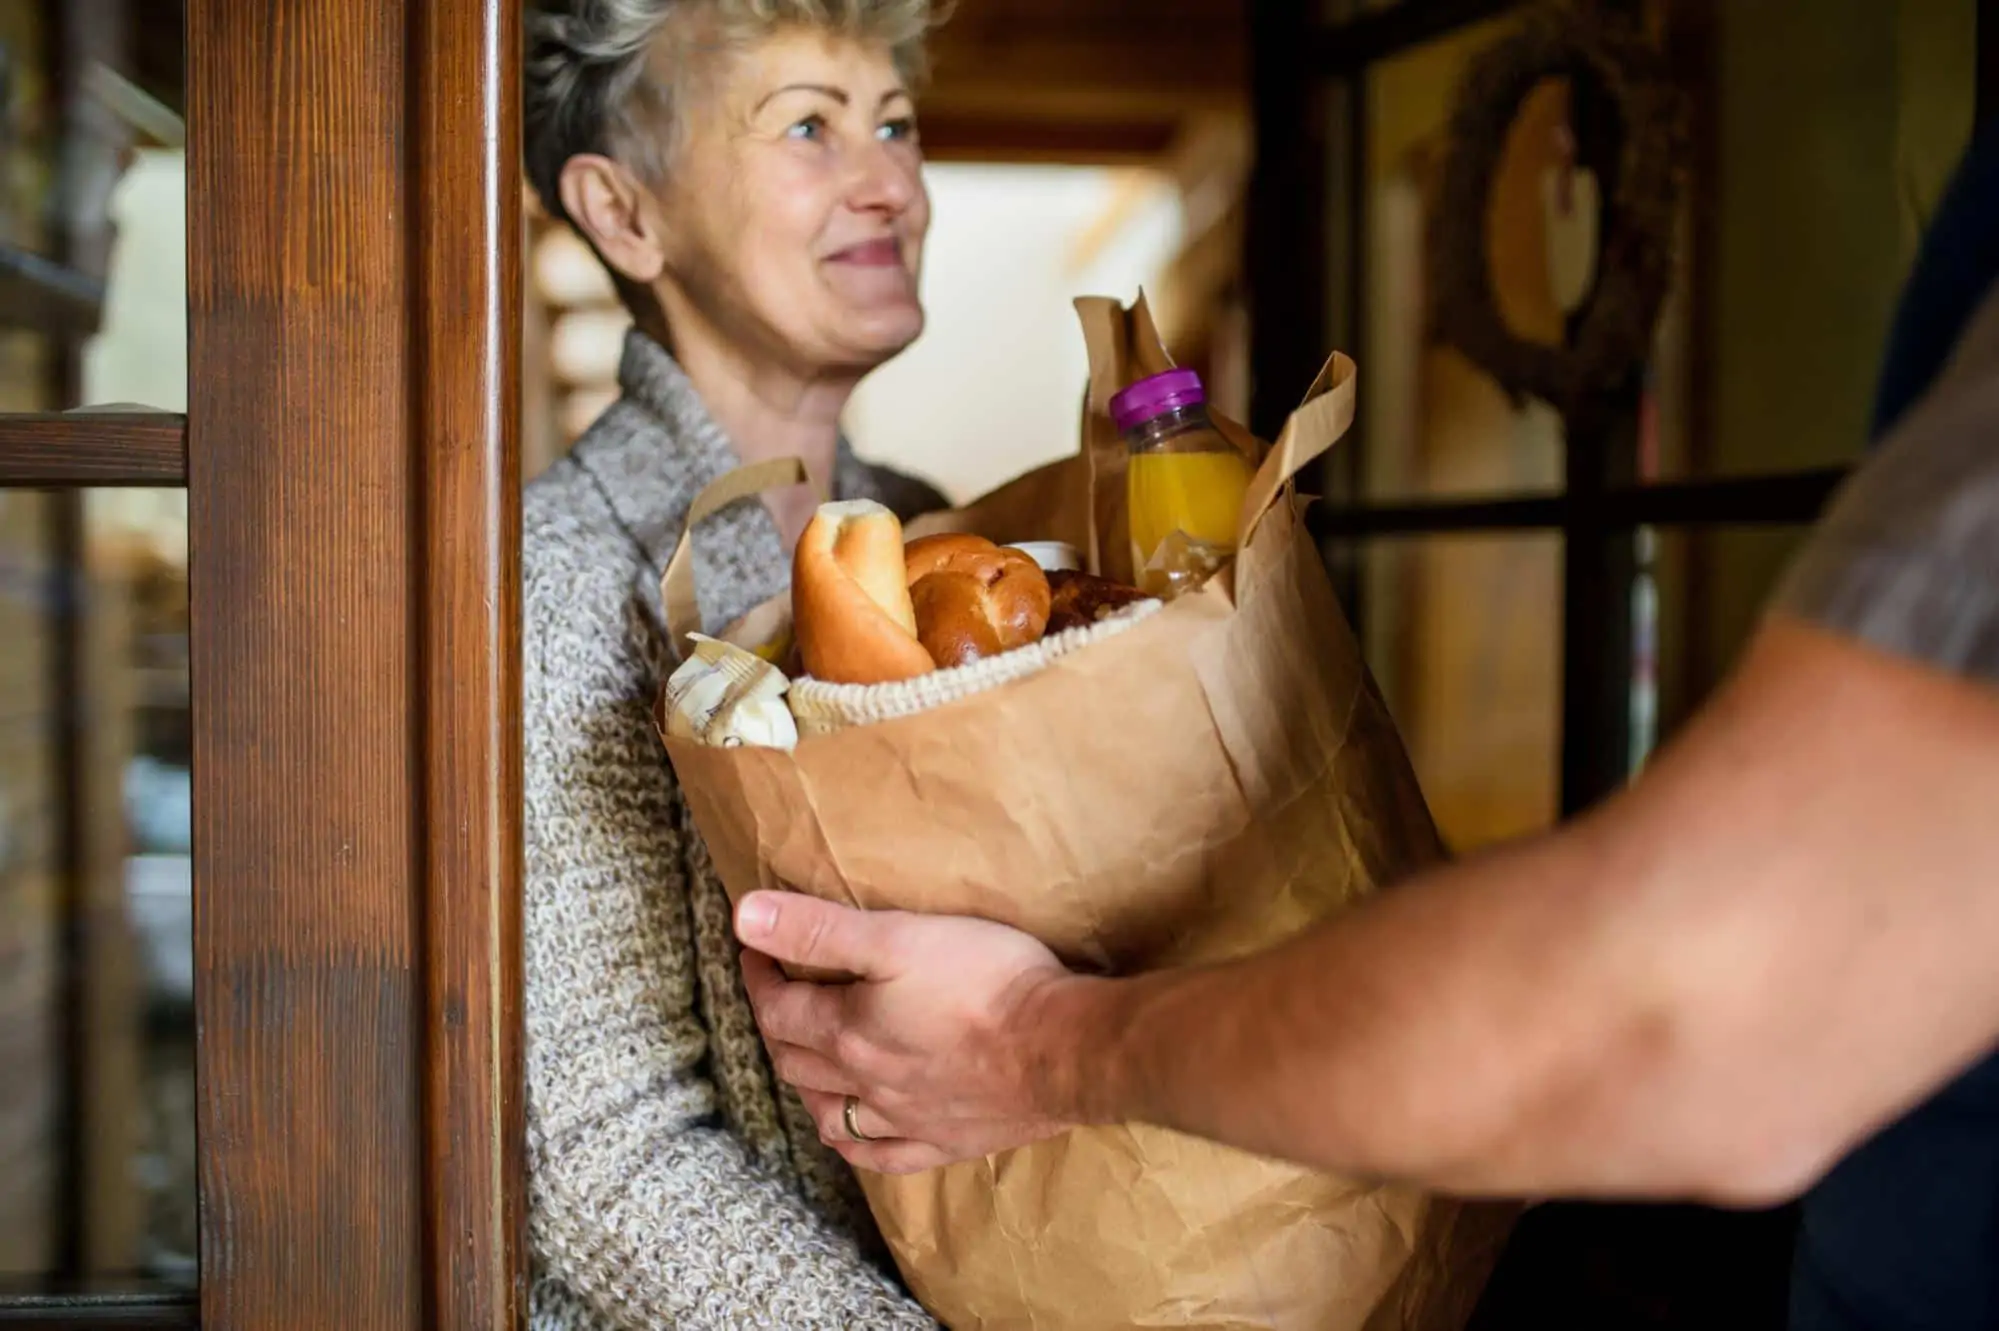 What is Prime Now: Courier delivering groceries to an old woman